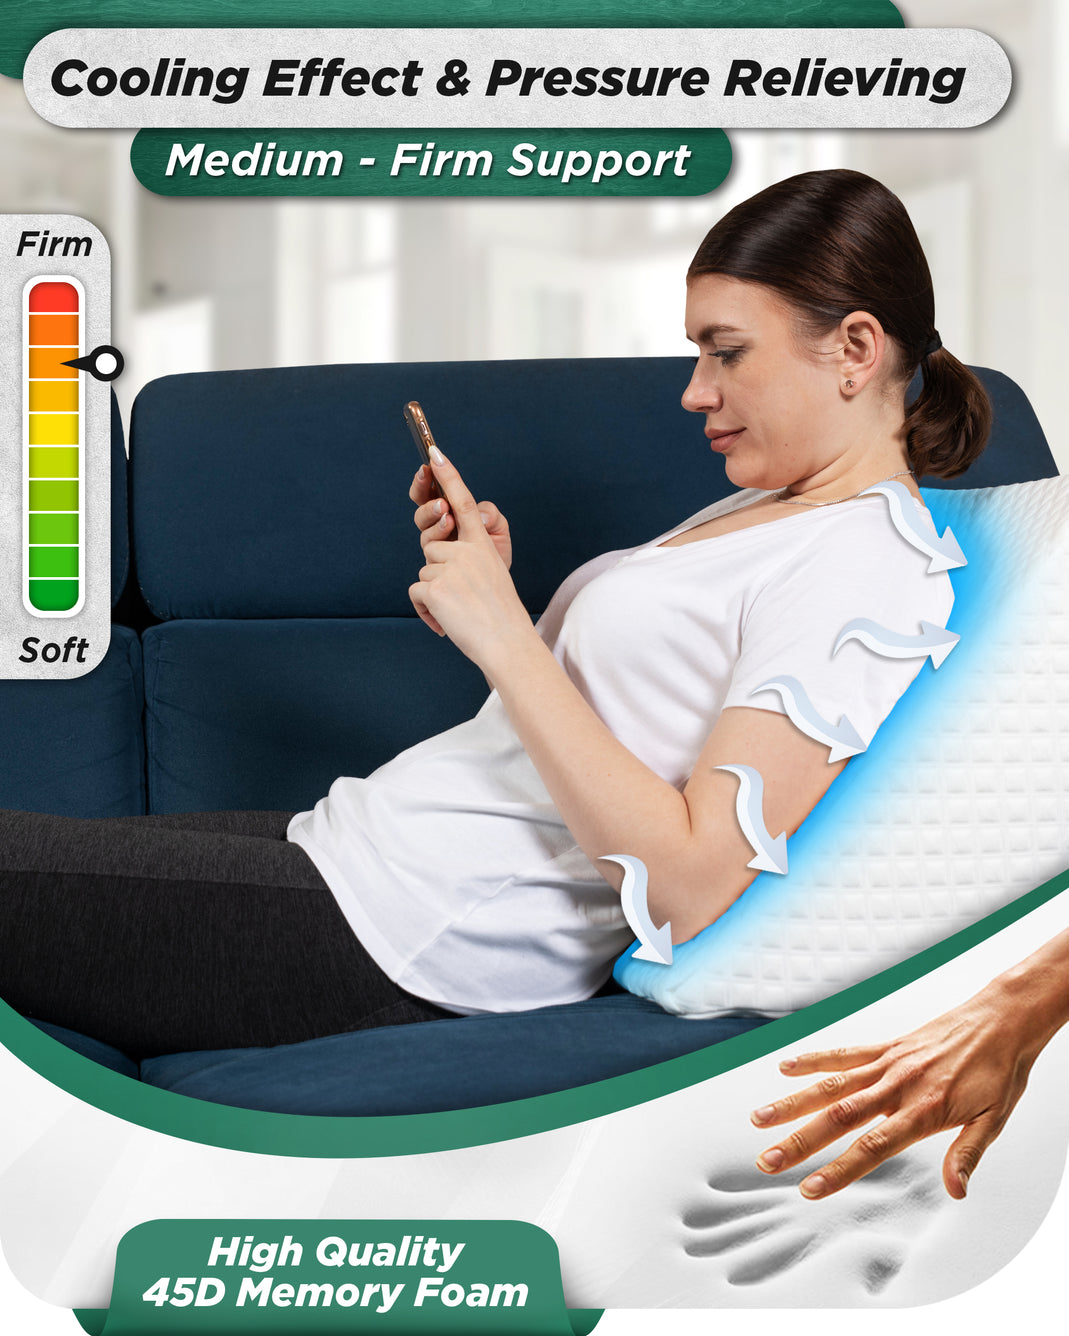 5PCS Bed Wedge Pillow Set, Orthopedic Pillows for After Surgery, Back and  Lumbar Support Pillow for Sitting in Bed and Rest, Triangle Knee Pillows  for